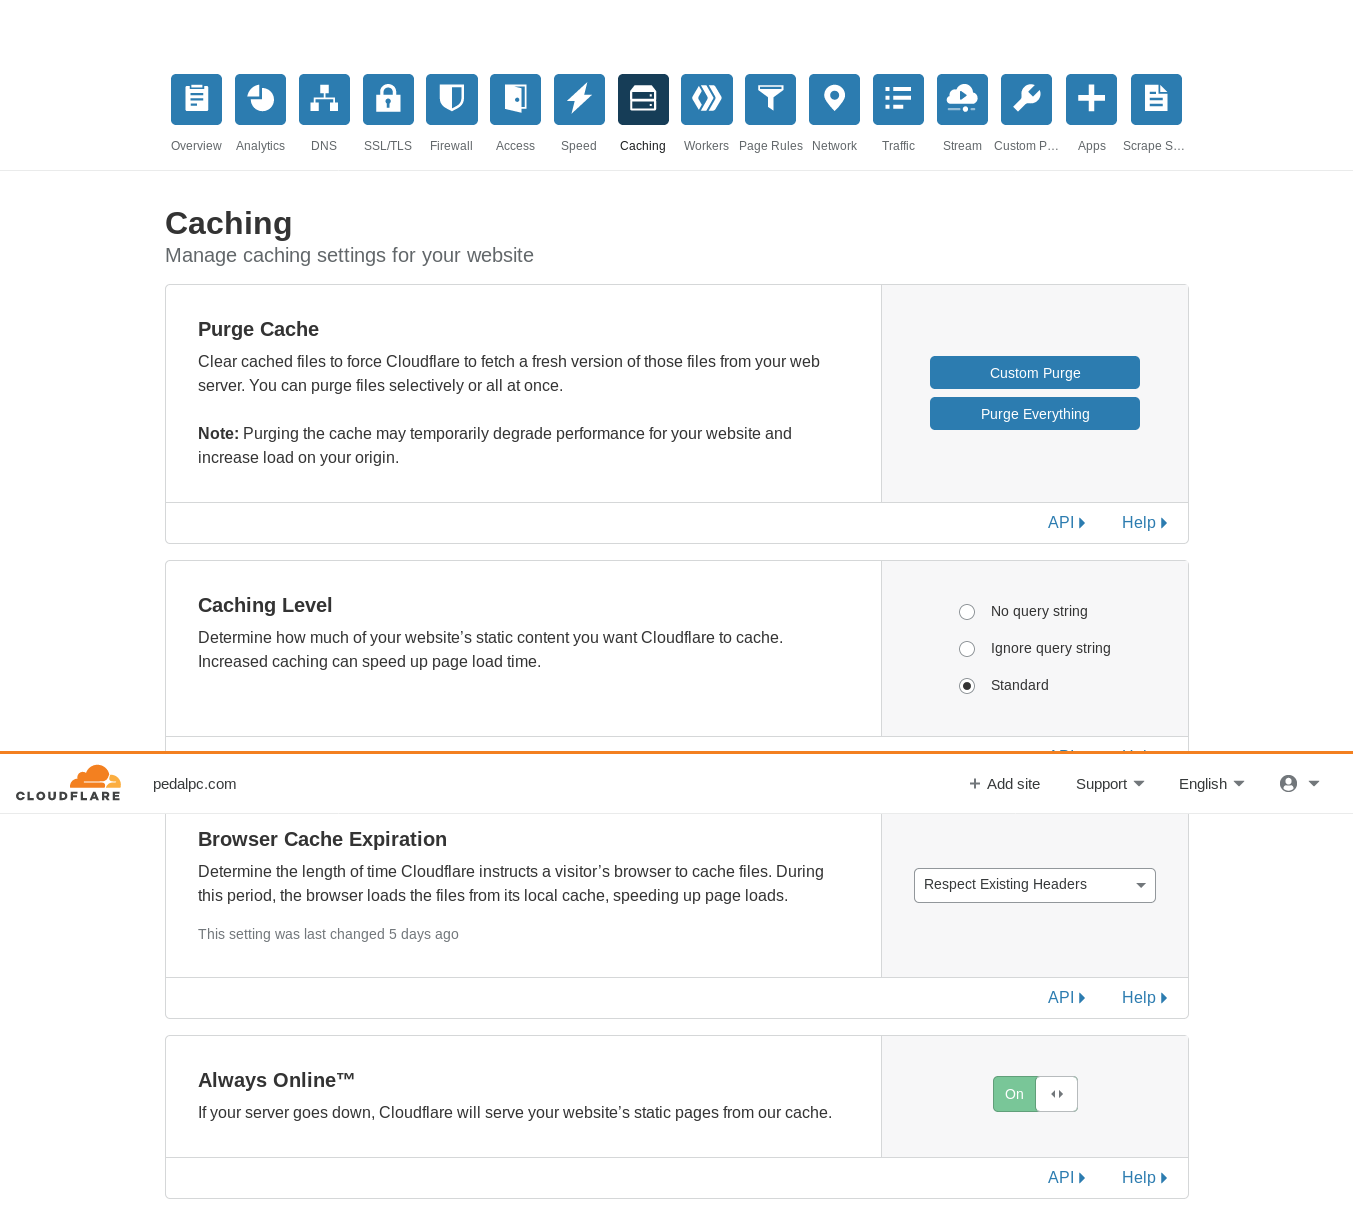 Screen of the Cloudflare caching dashboard